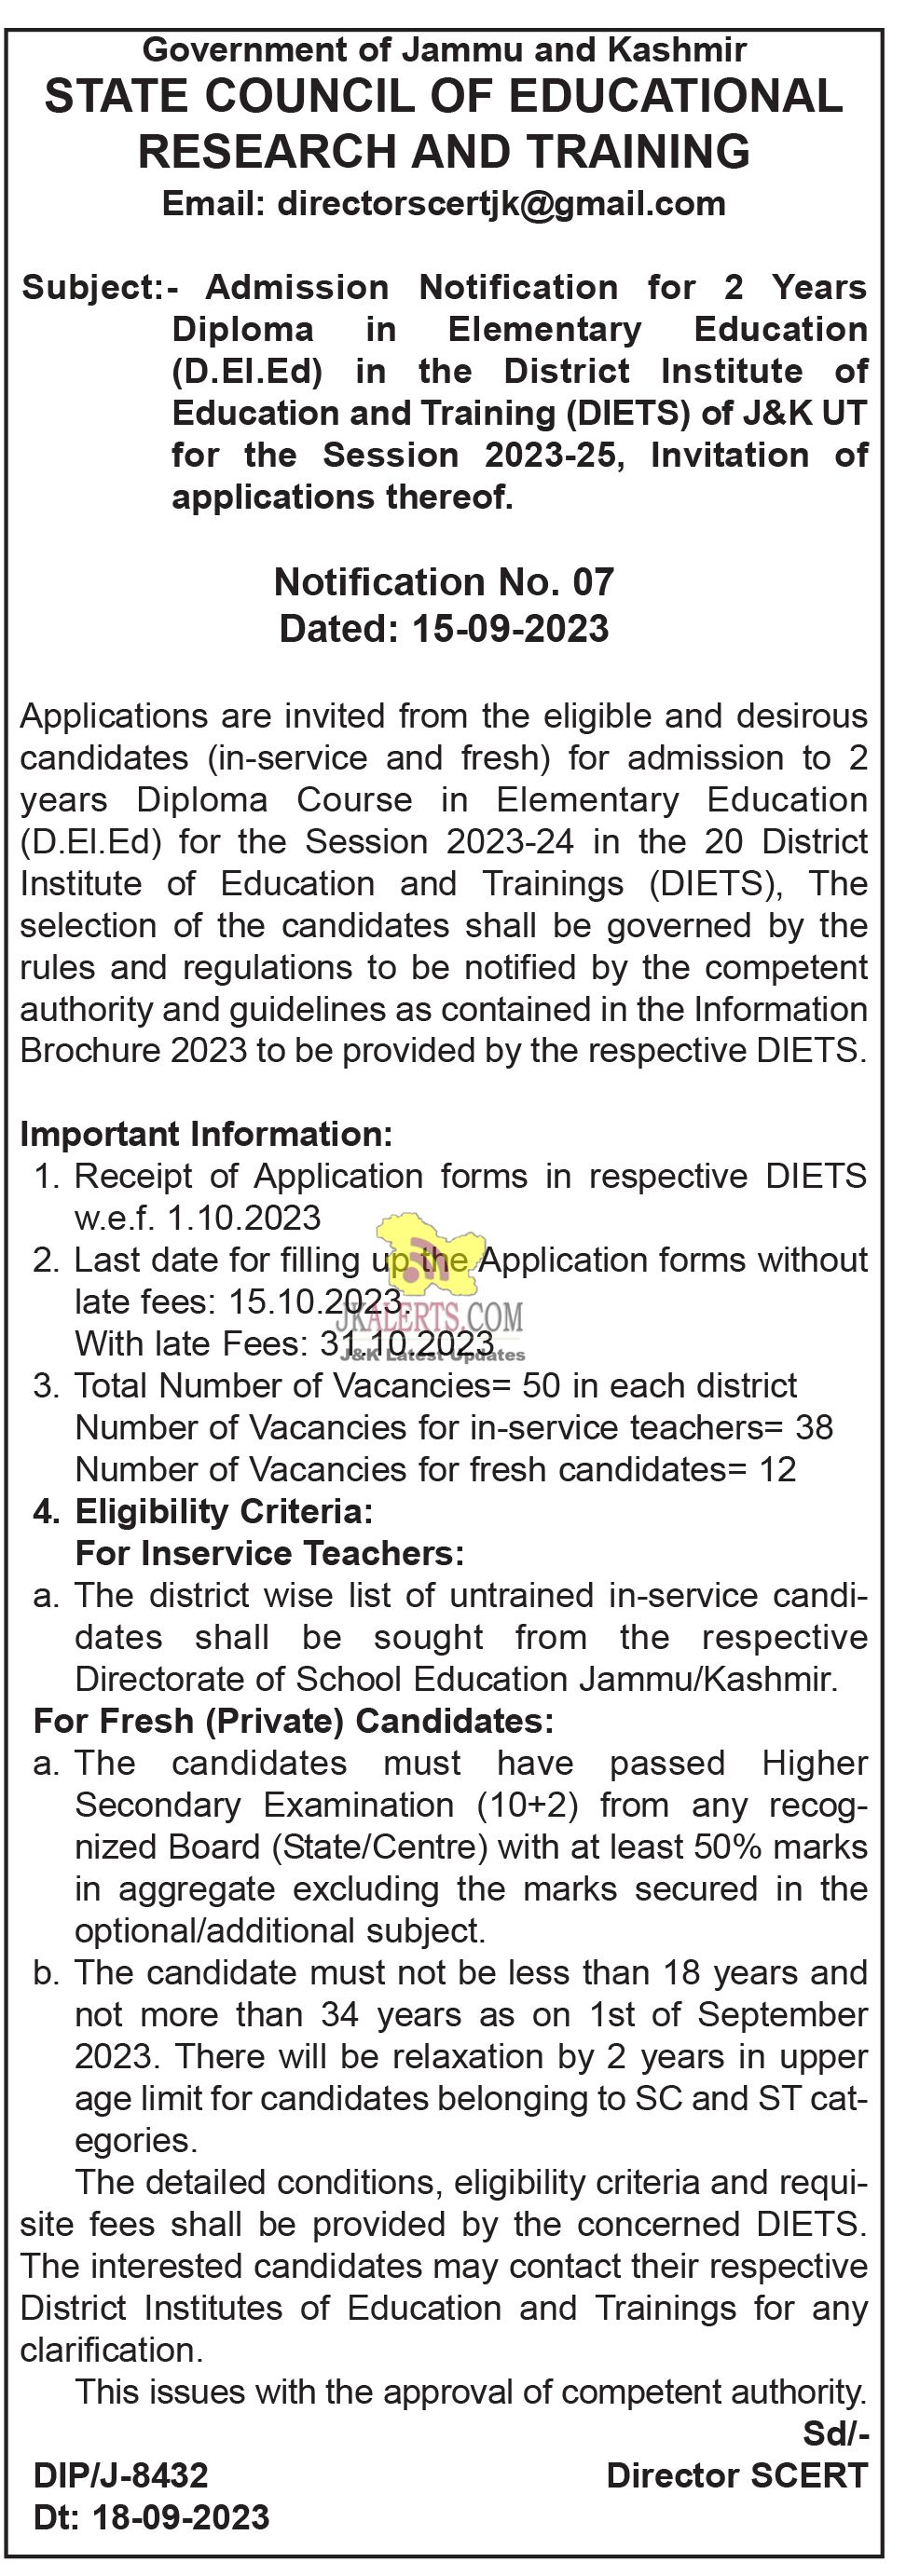 Admission Notification for Diploma in Elementary Education (D.El.Ed).